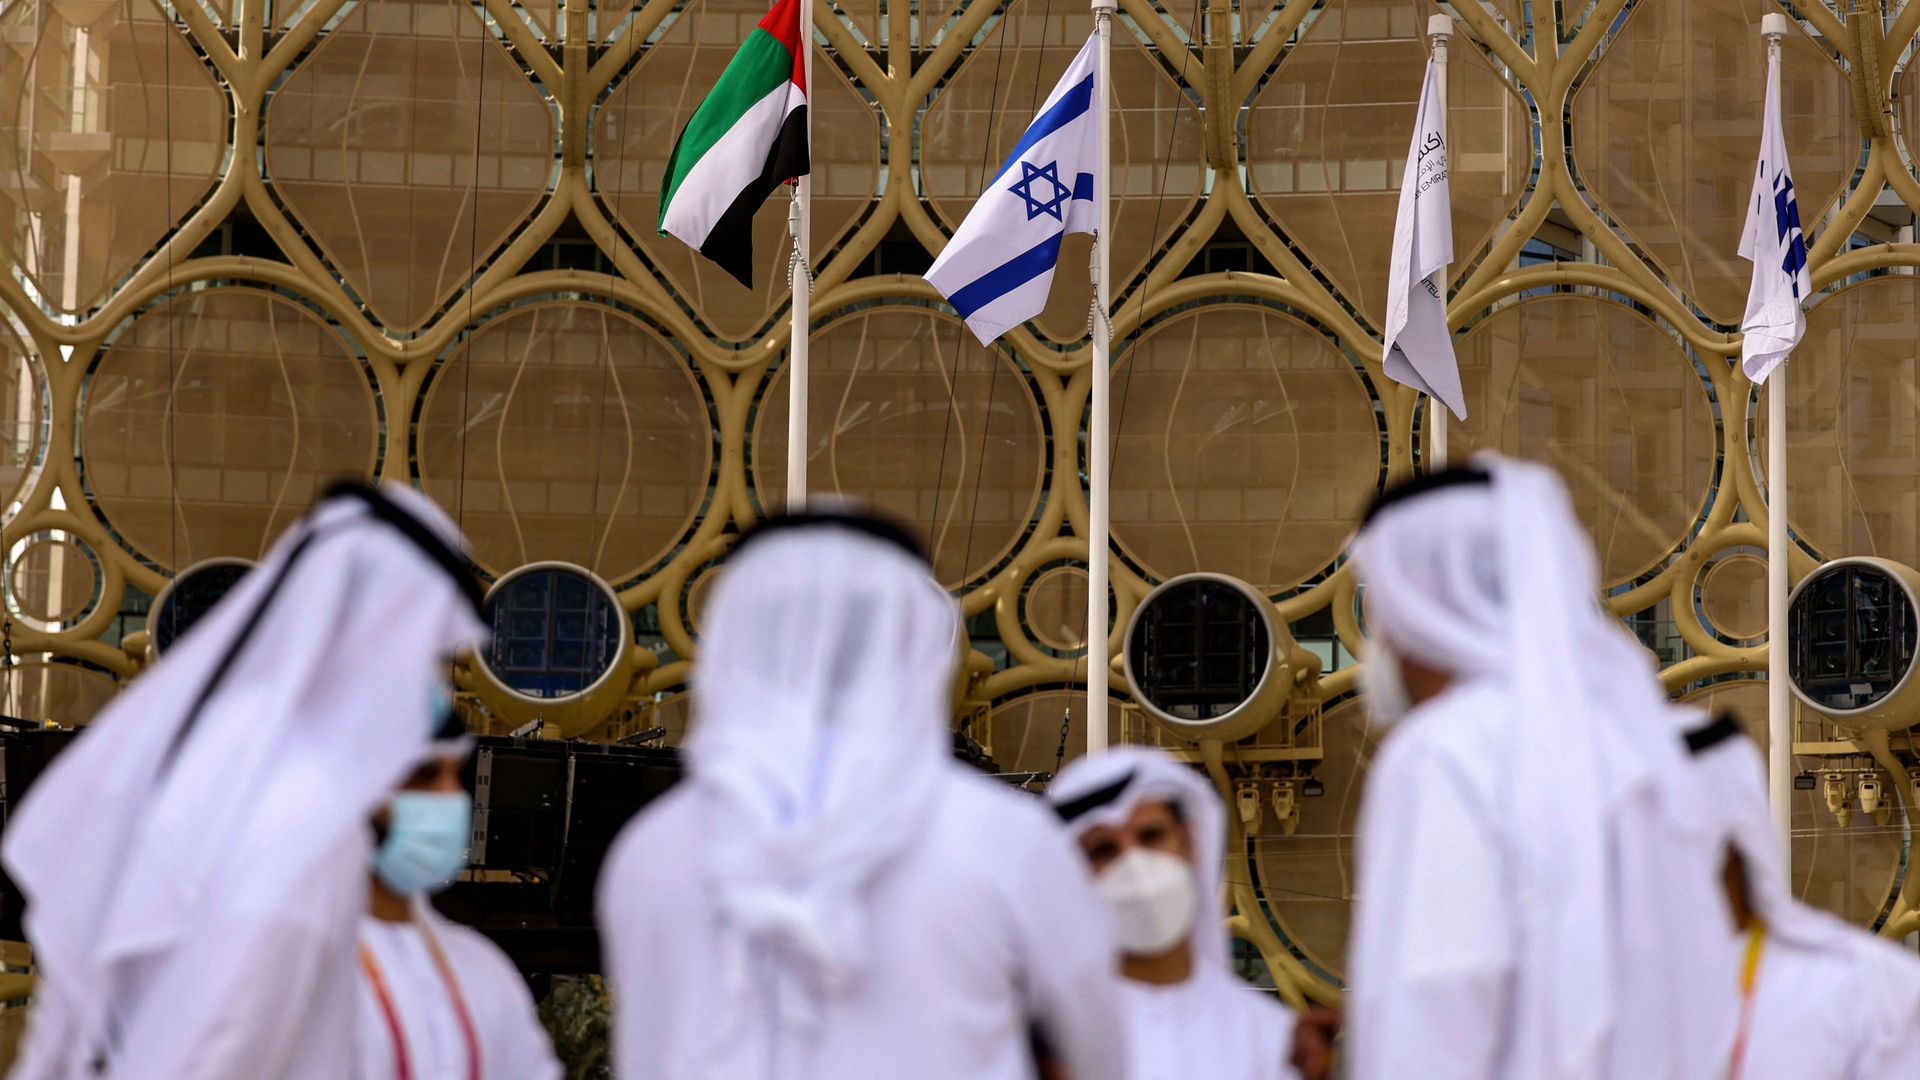 The flags of the UAE and Israel fly at Expo 2020 Dubai in the Gulf country on Jan. 31. Photo: Karim Sahib/AFP via Getty Images